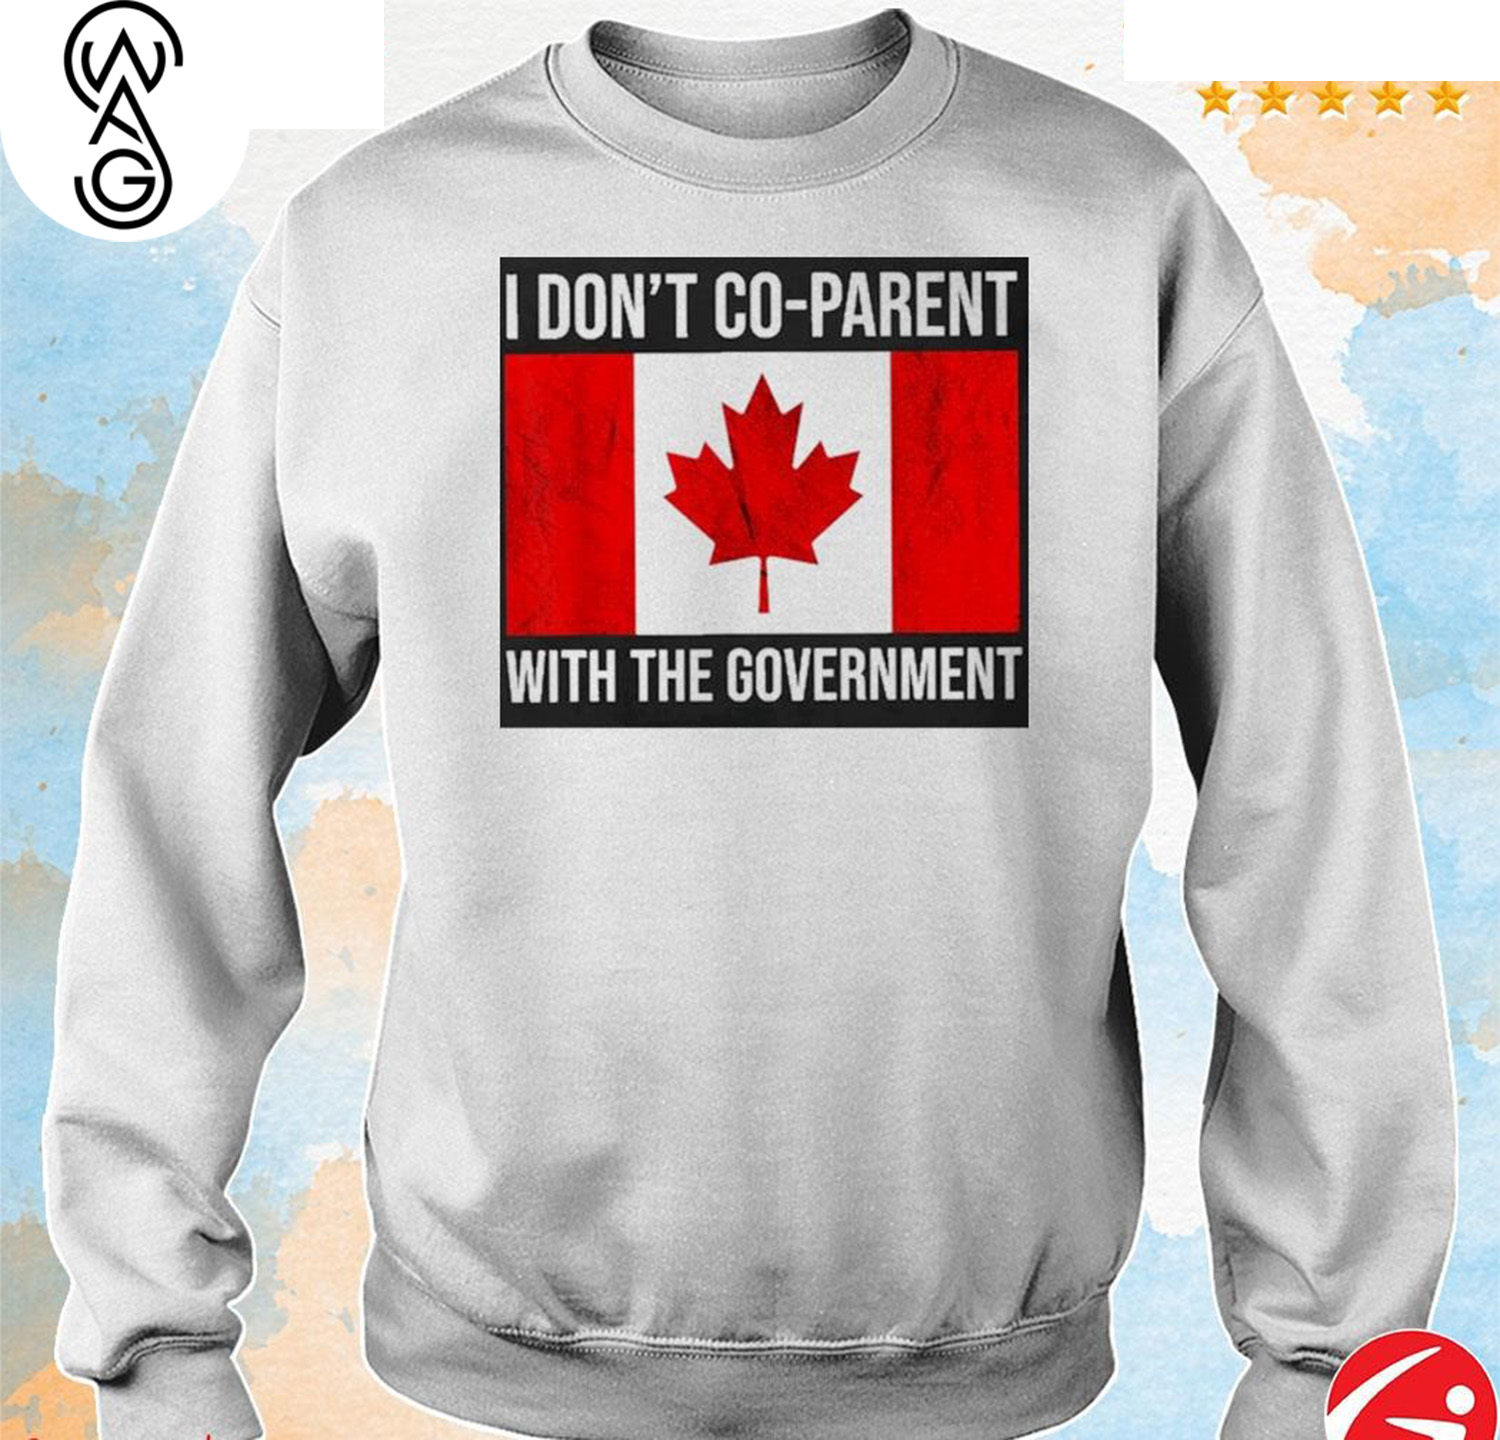 Canada Sweater A Symbol of Unity in the Fight for Parental Rights